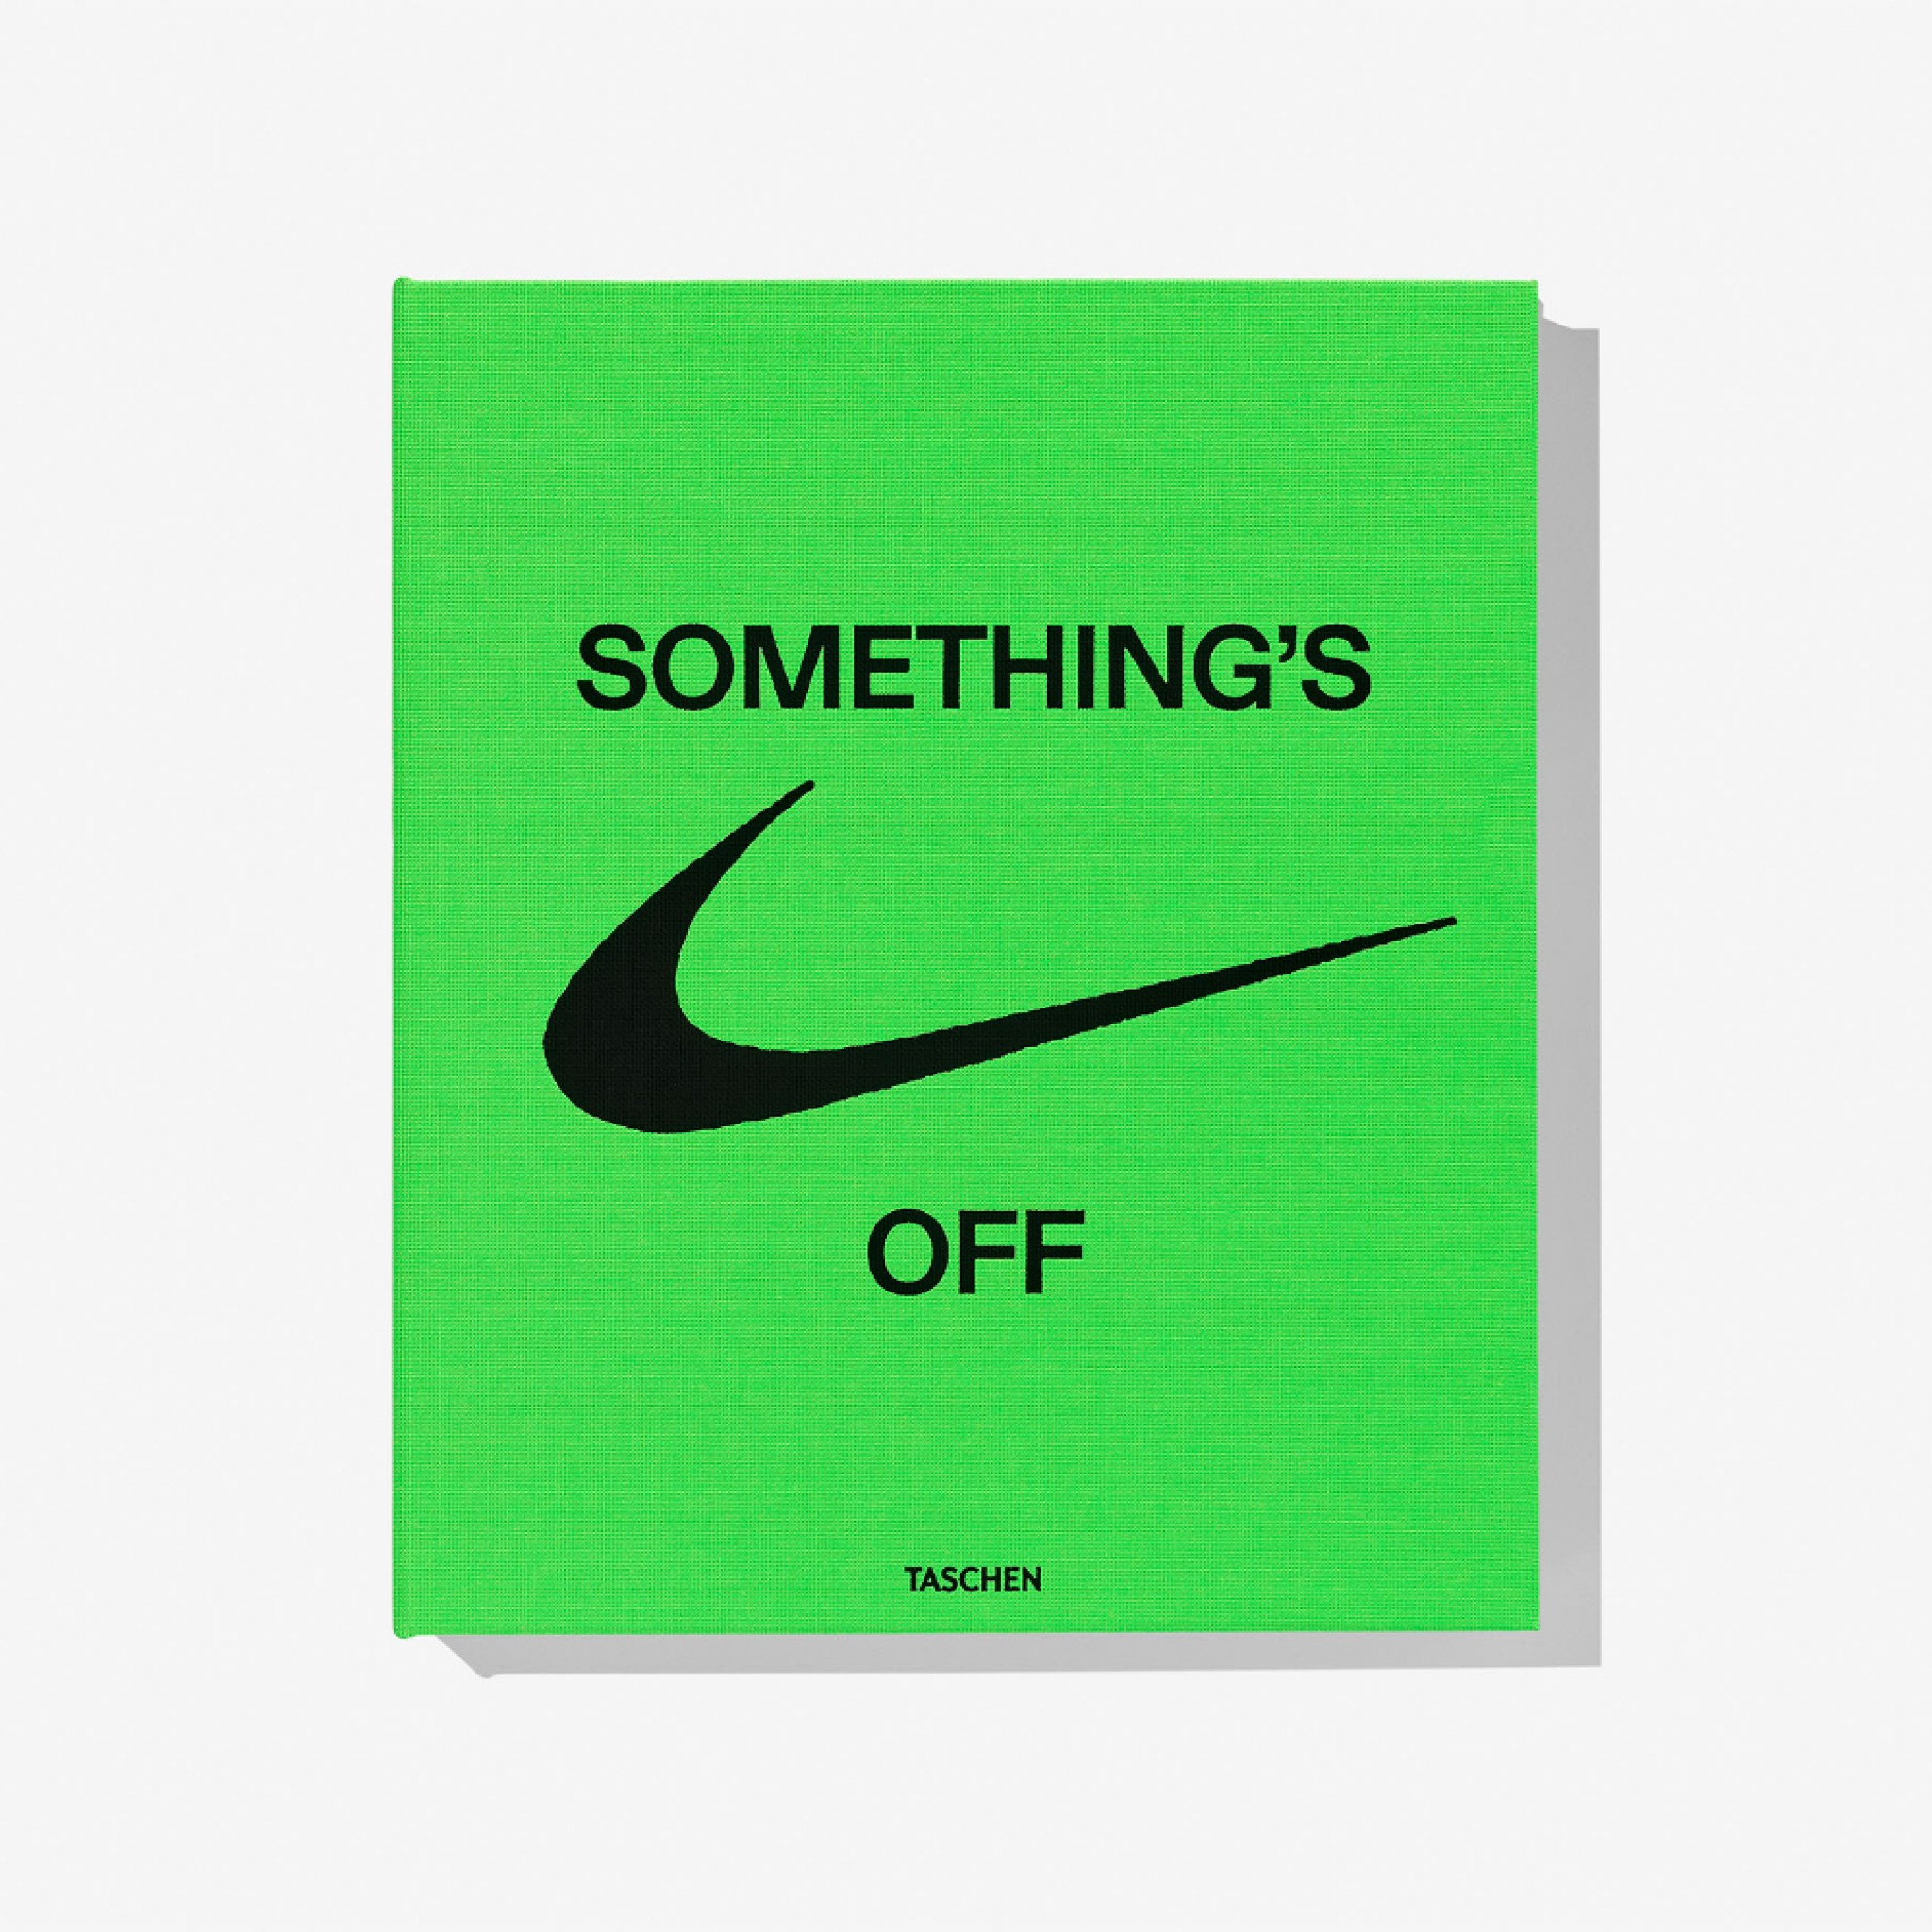 ICONS by Zak Group and Virgil Abloh